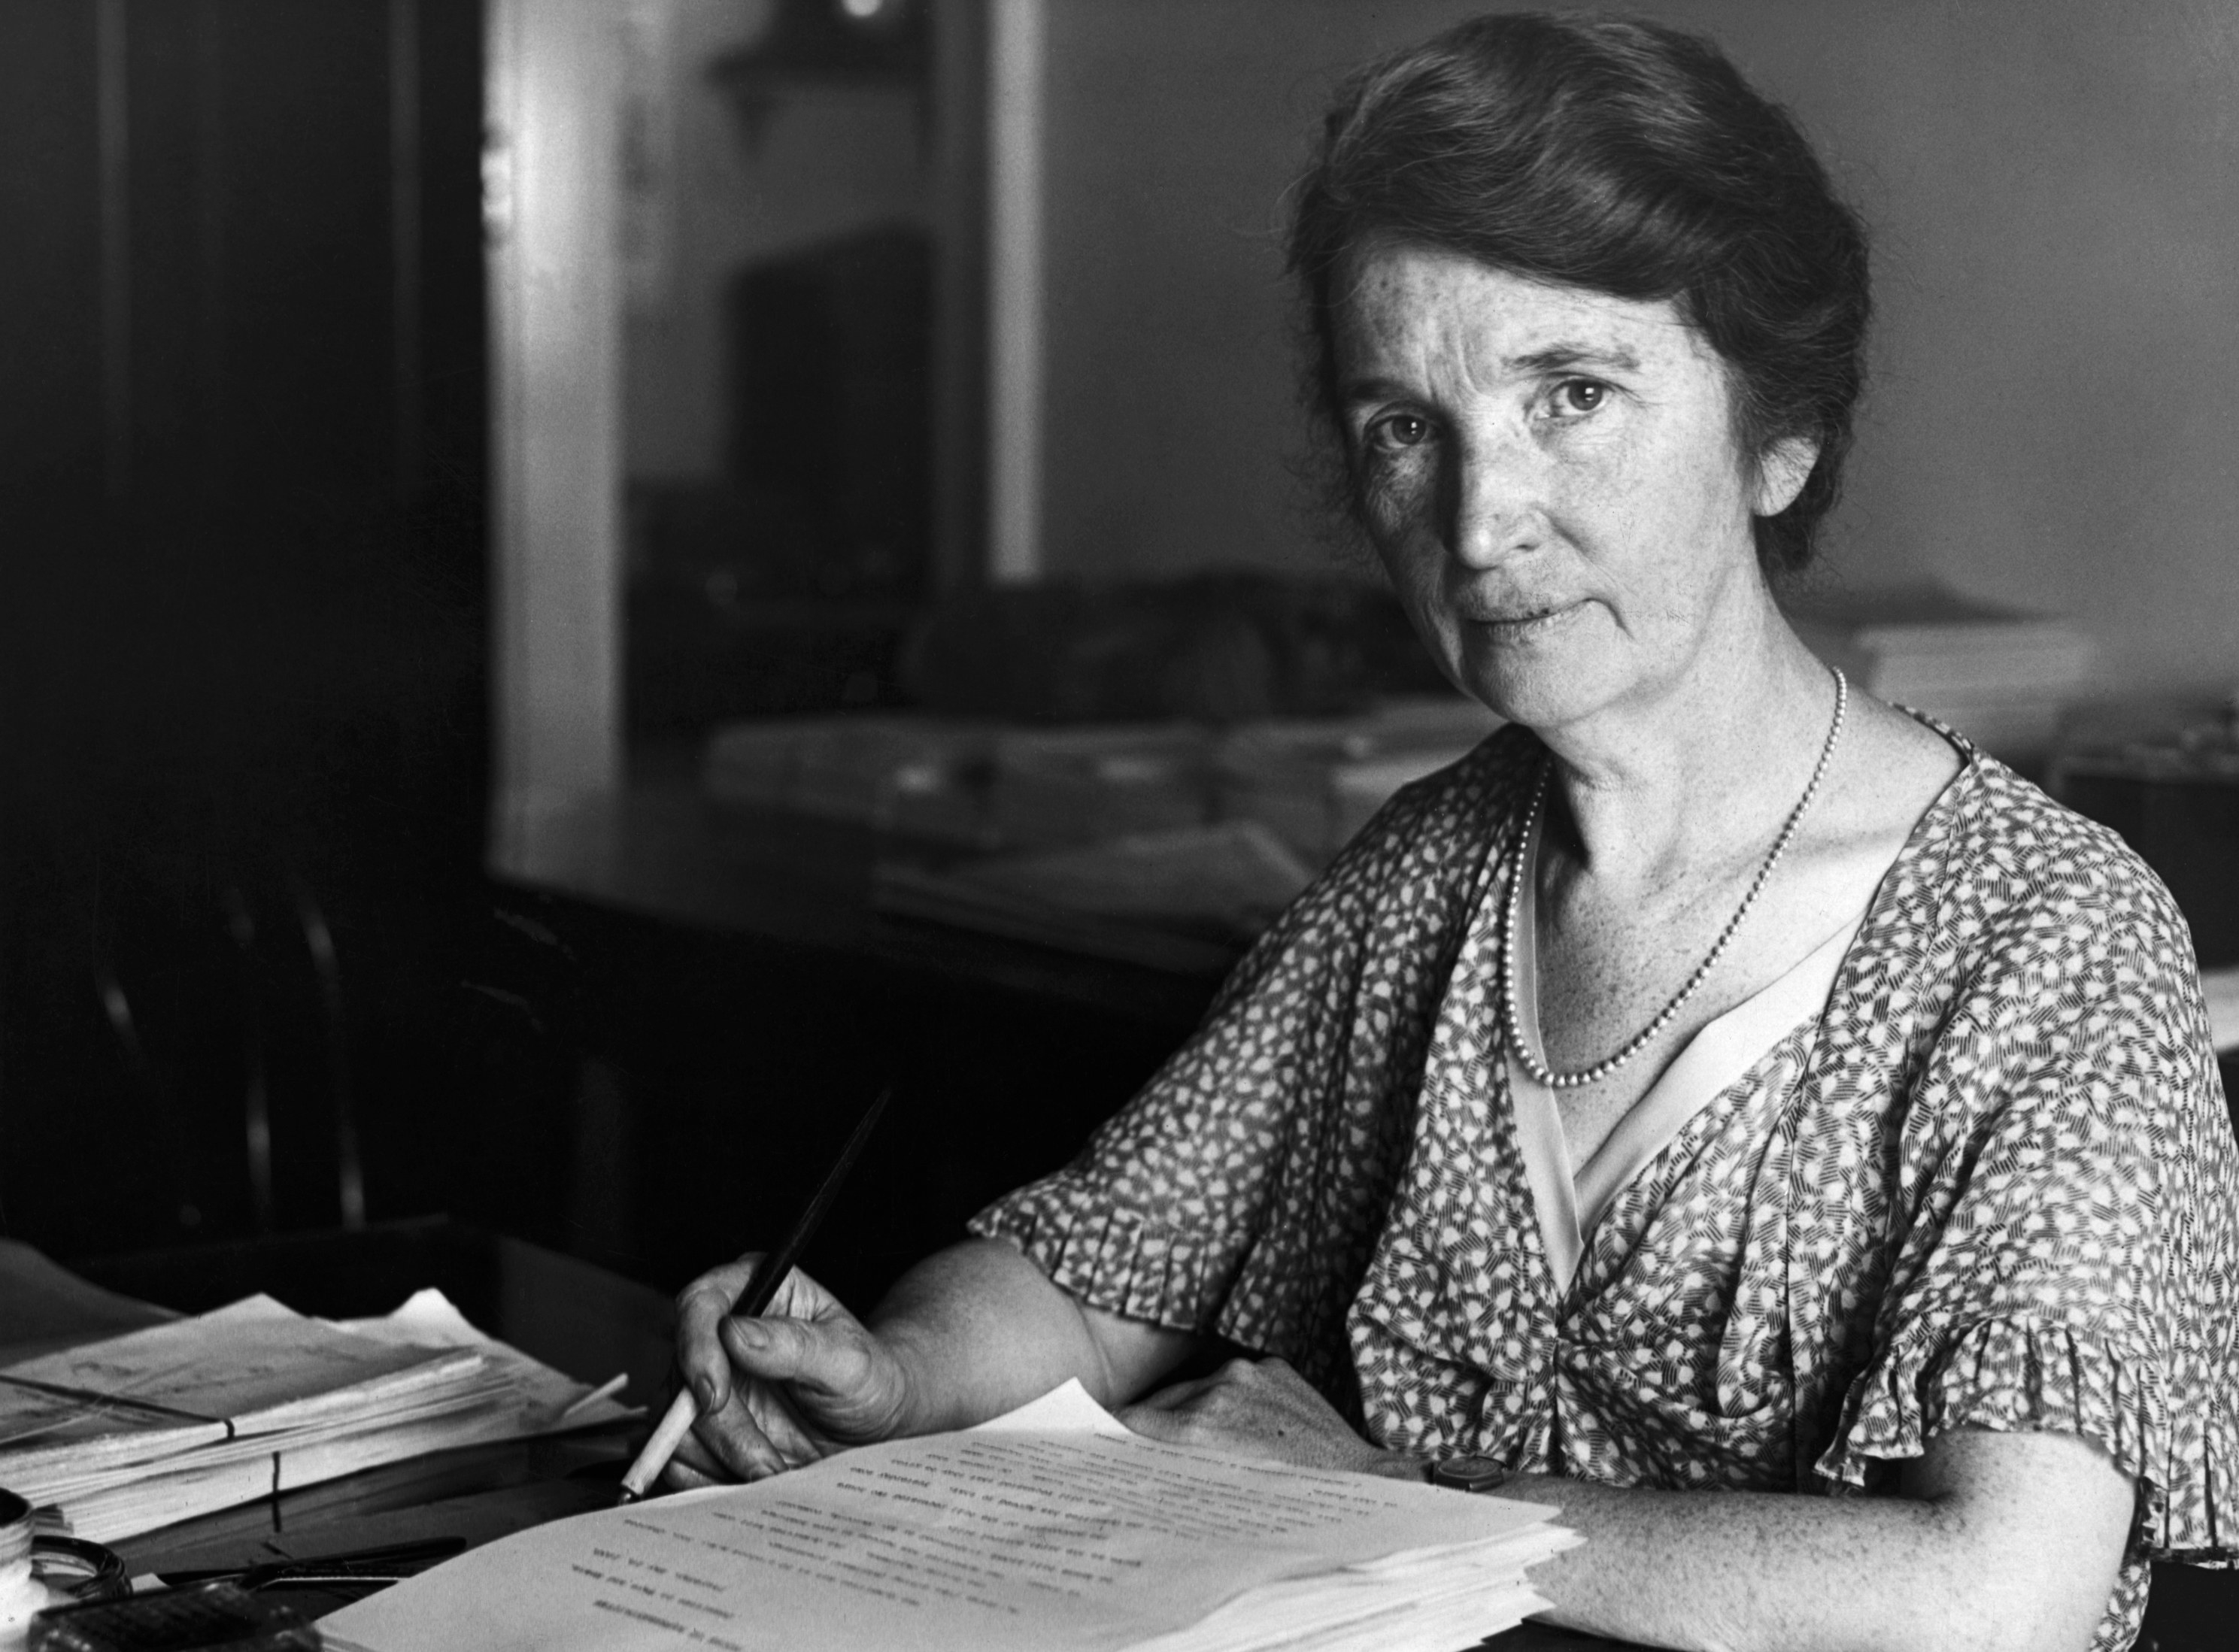 Portrait of Margaret Sanger, wearing a loose, short sleeved, patterned dress. She is looking into the camera in what looks like an office surrounding, with a stack of papers in front of her and a pen in her hand